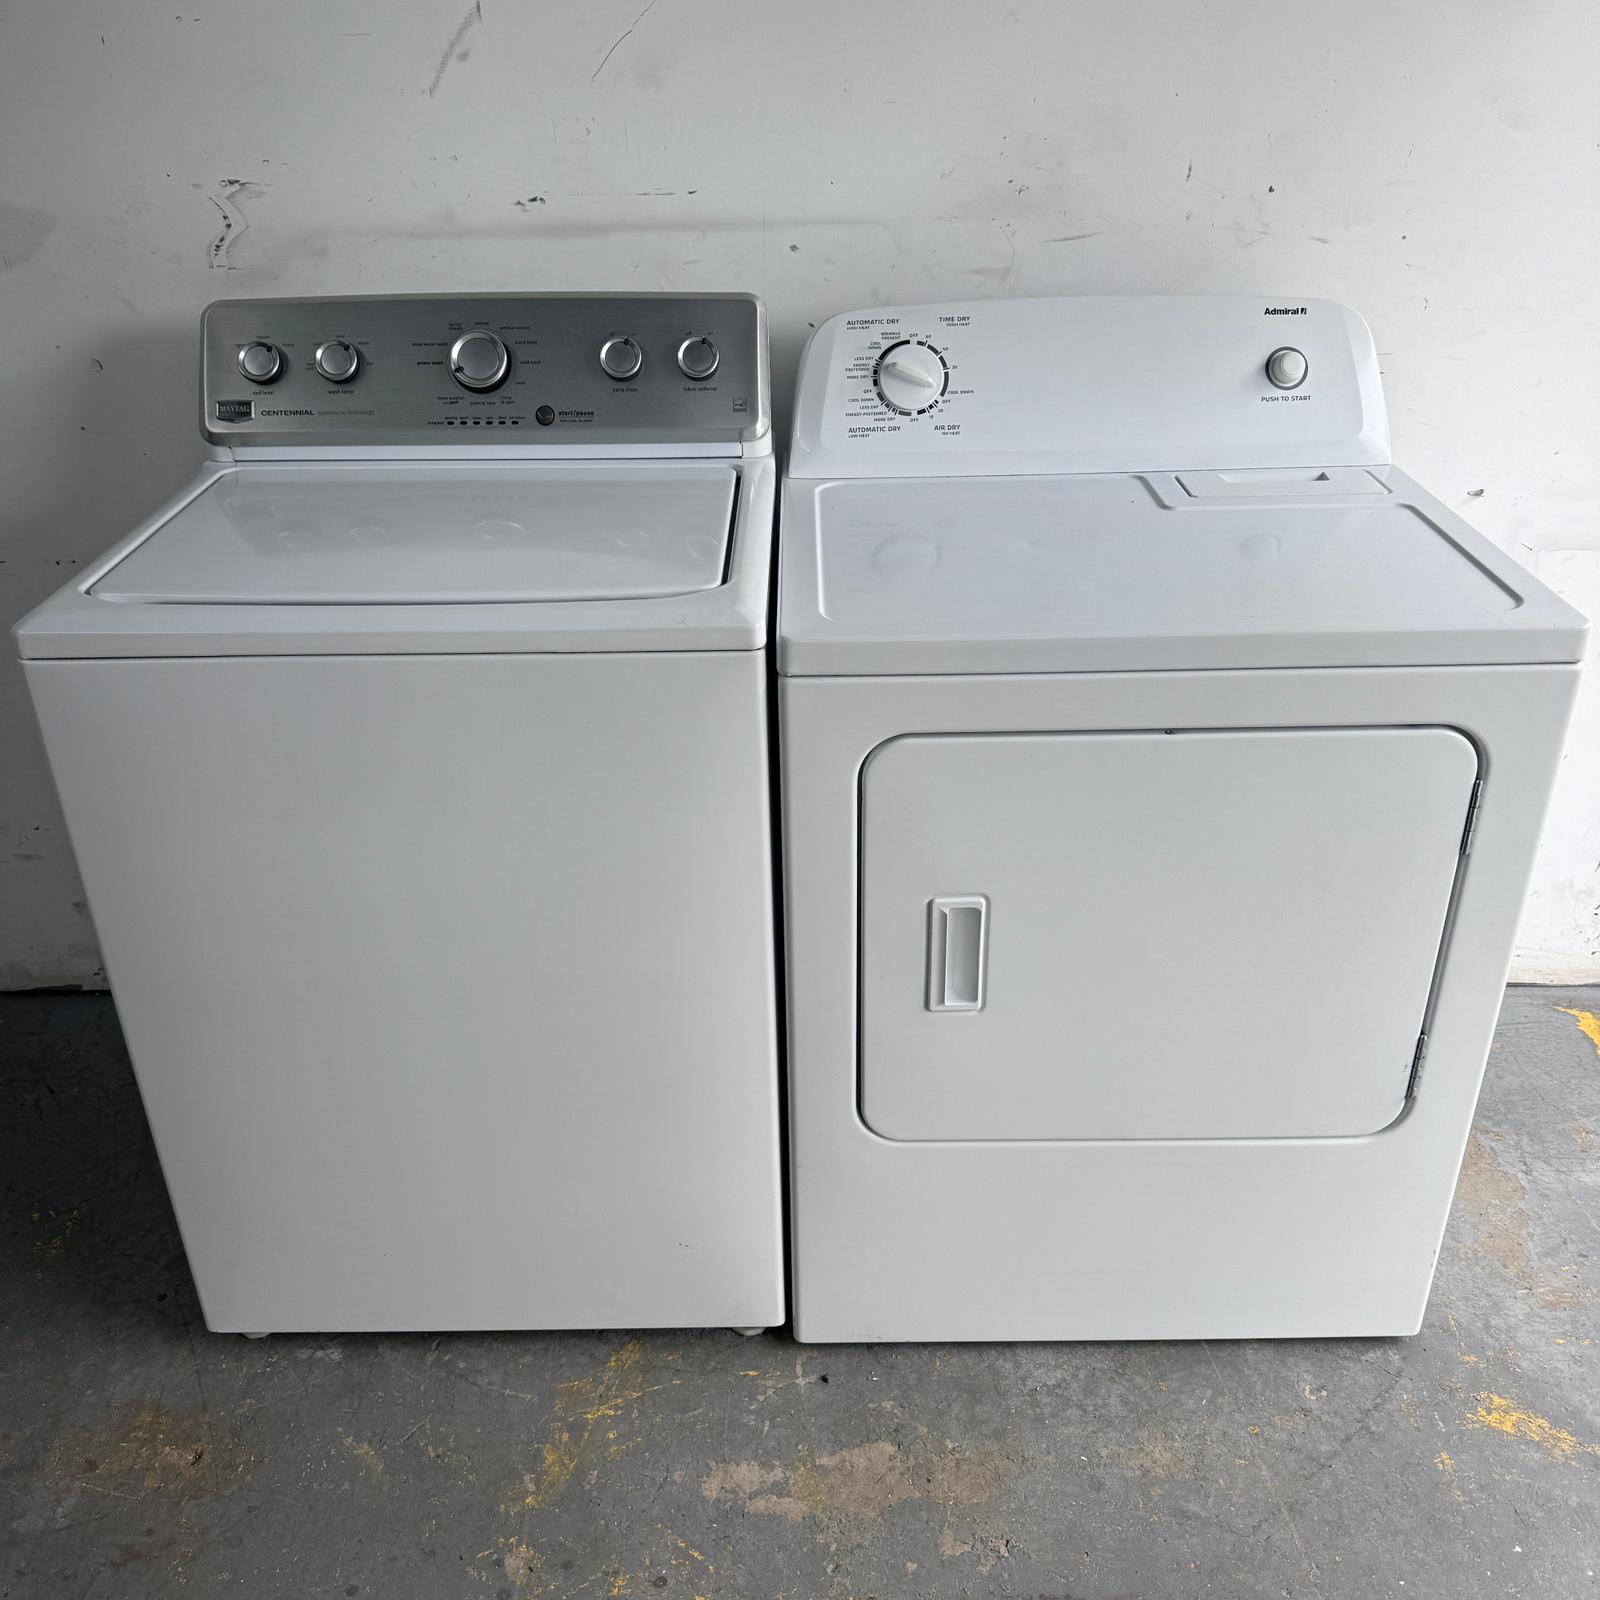 Maytag-Washer-and-Admiral-Dryer-Set